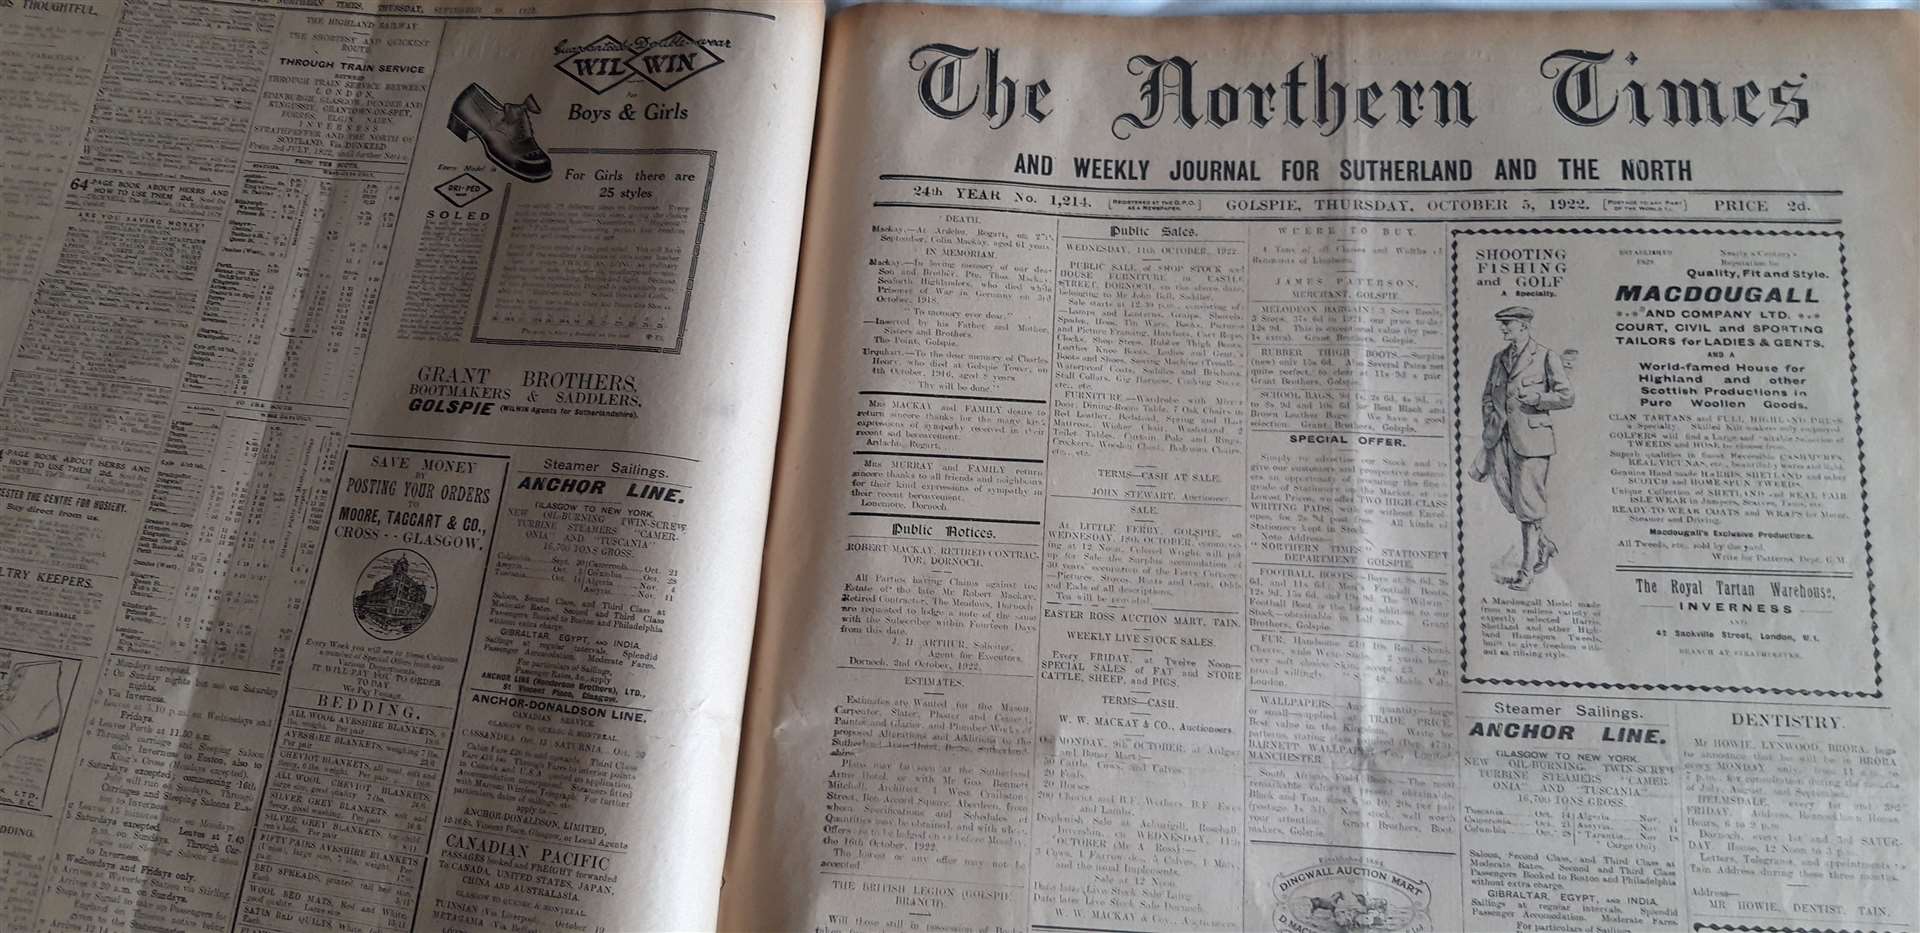 The edition of October 5, 1922.